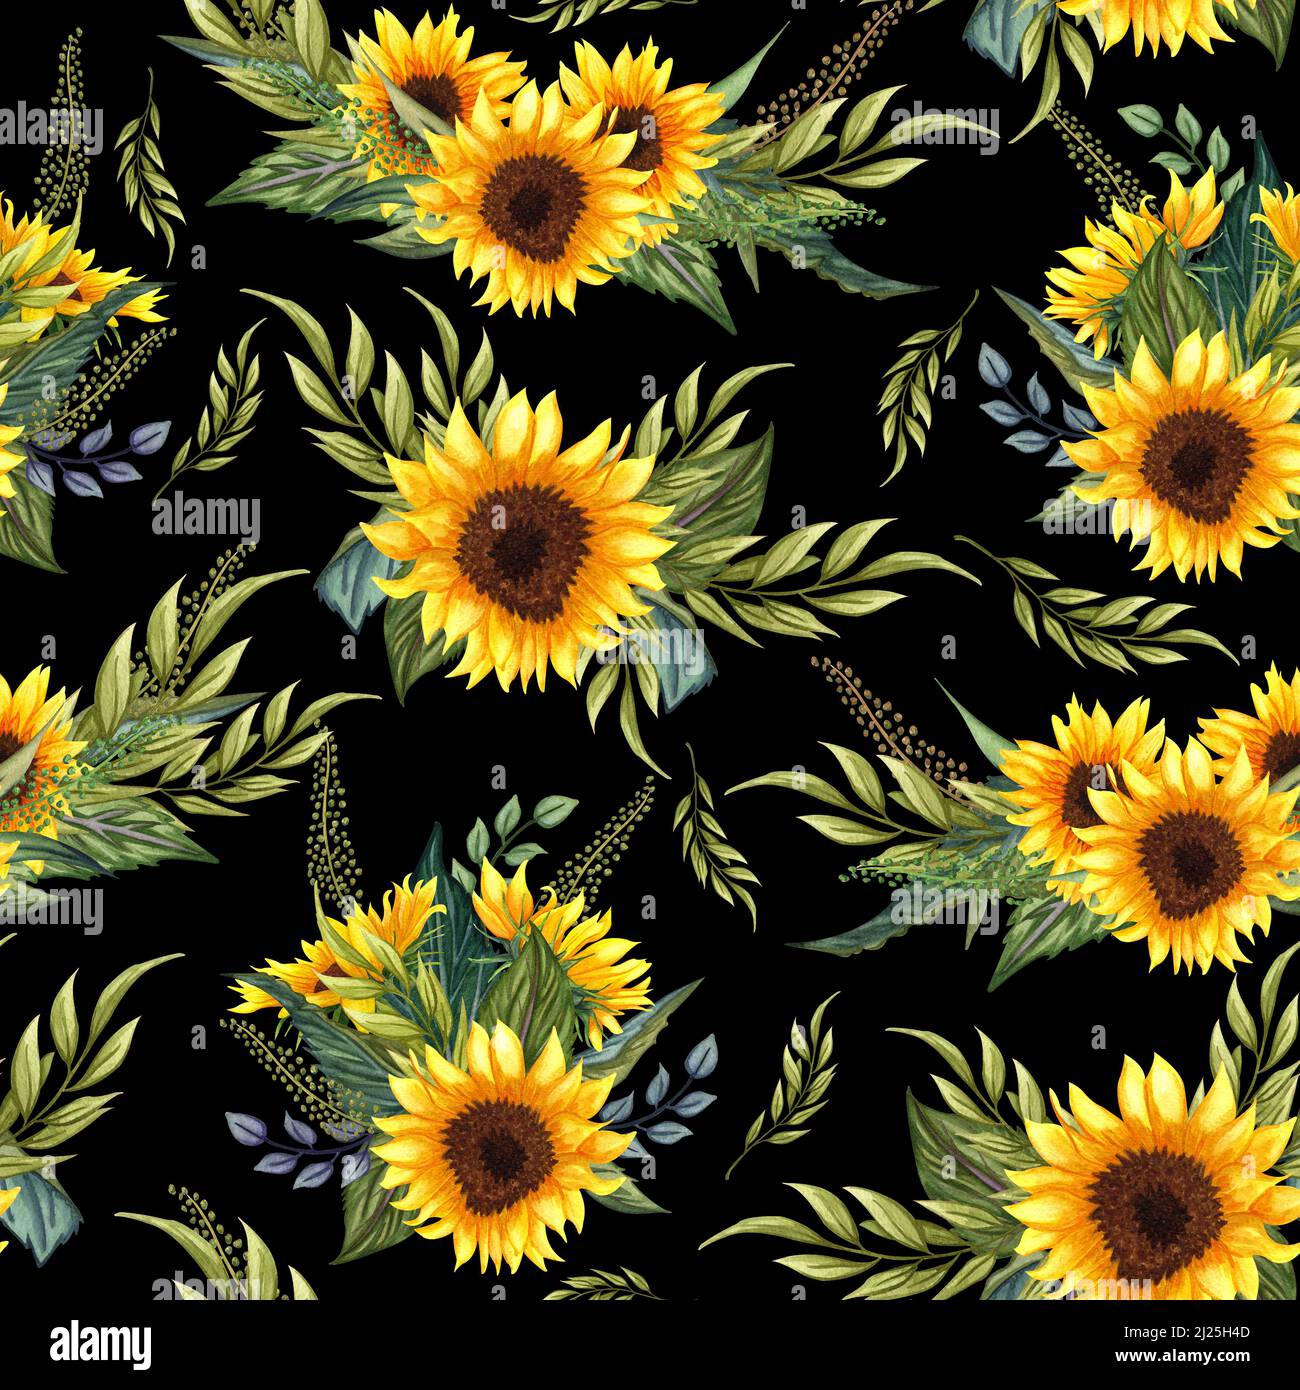 Seamless pattern with sunflowers on black background. Collection ...